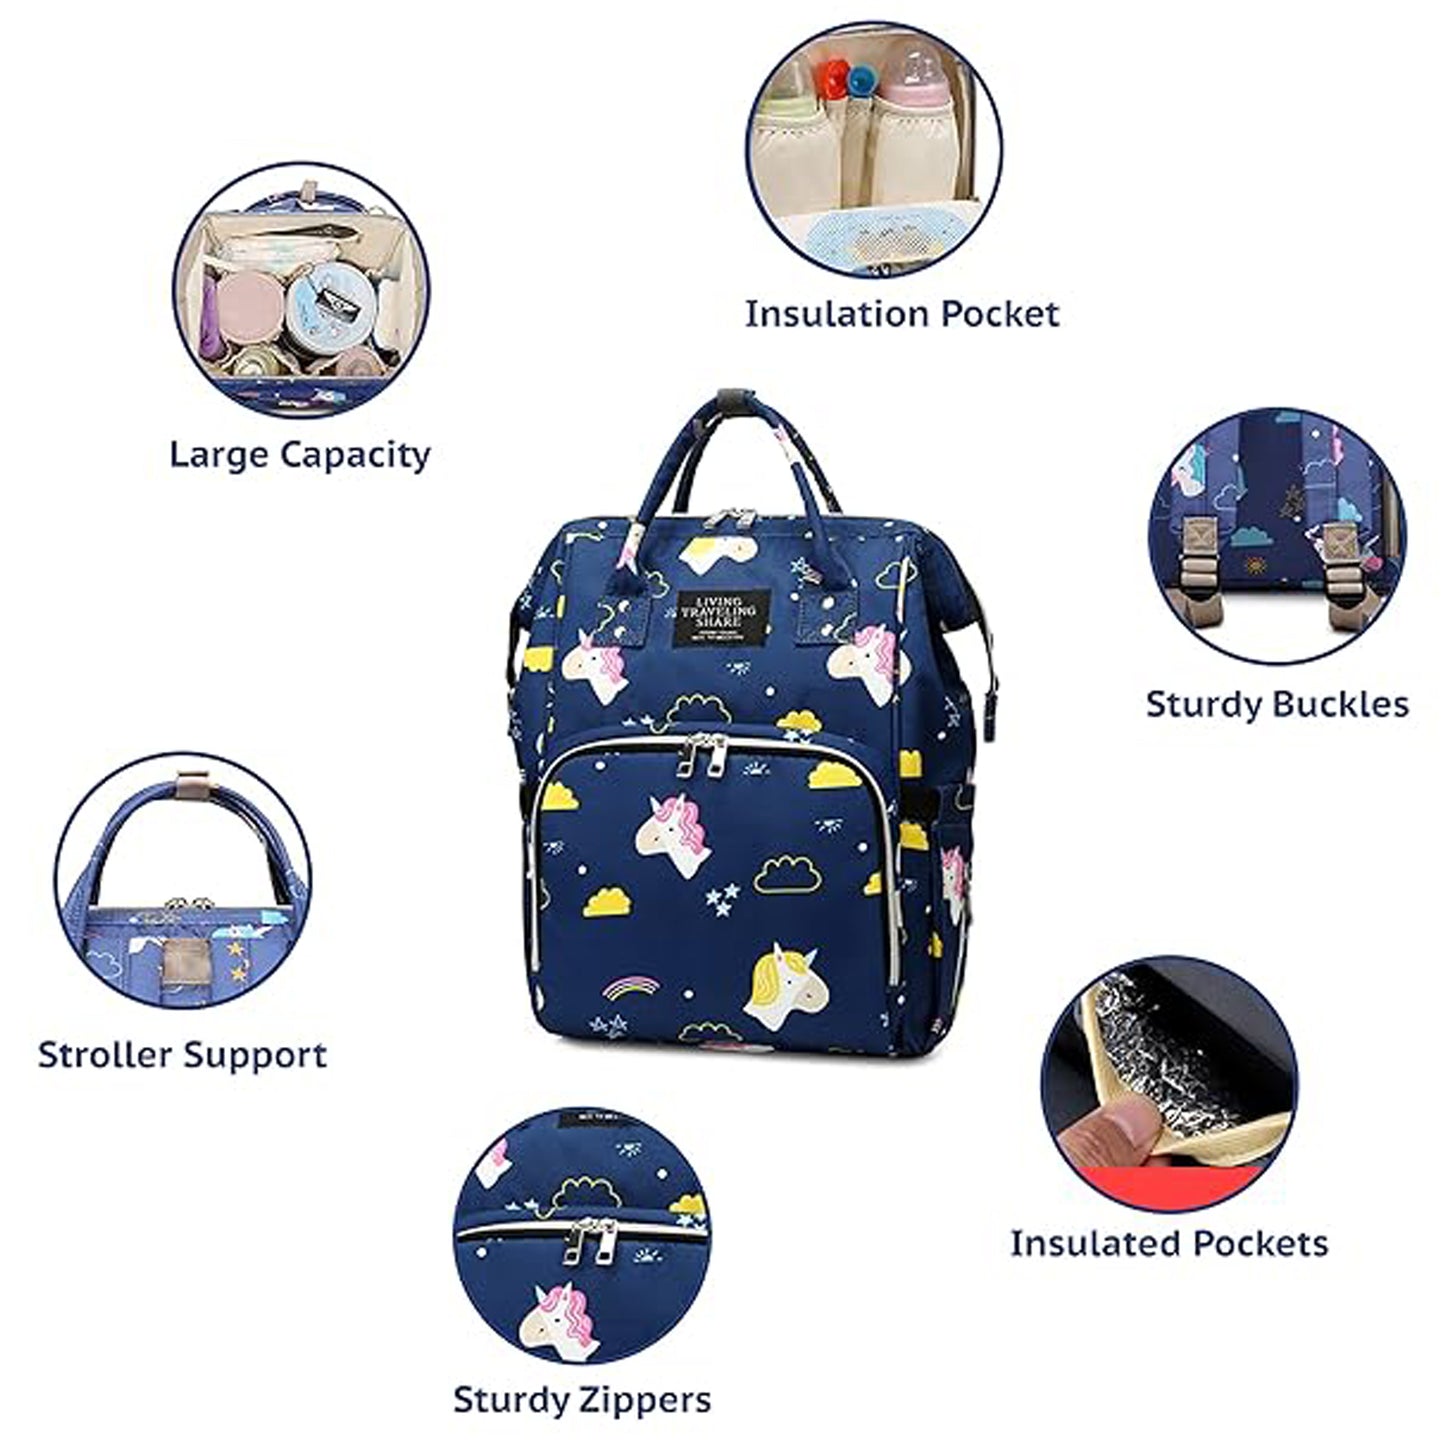 New Diaper BackpackTravel Handbags Waterproof Diaper Tote with Large Capacity Bottle Insulation for Mom Dad